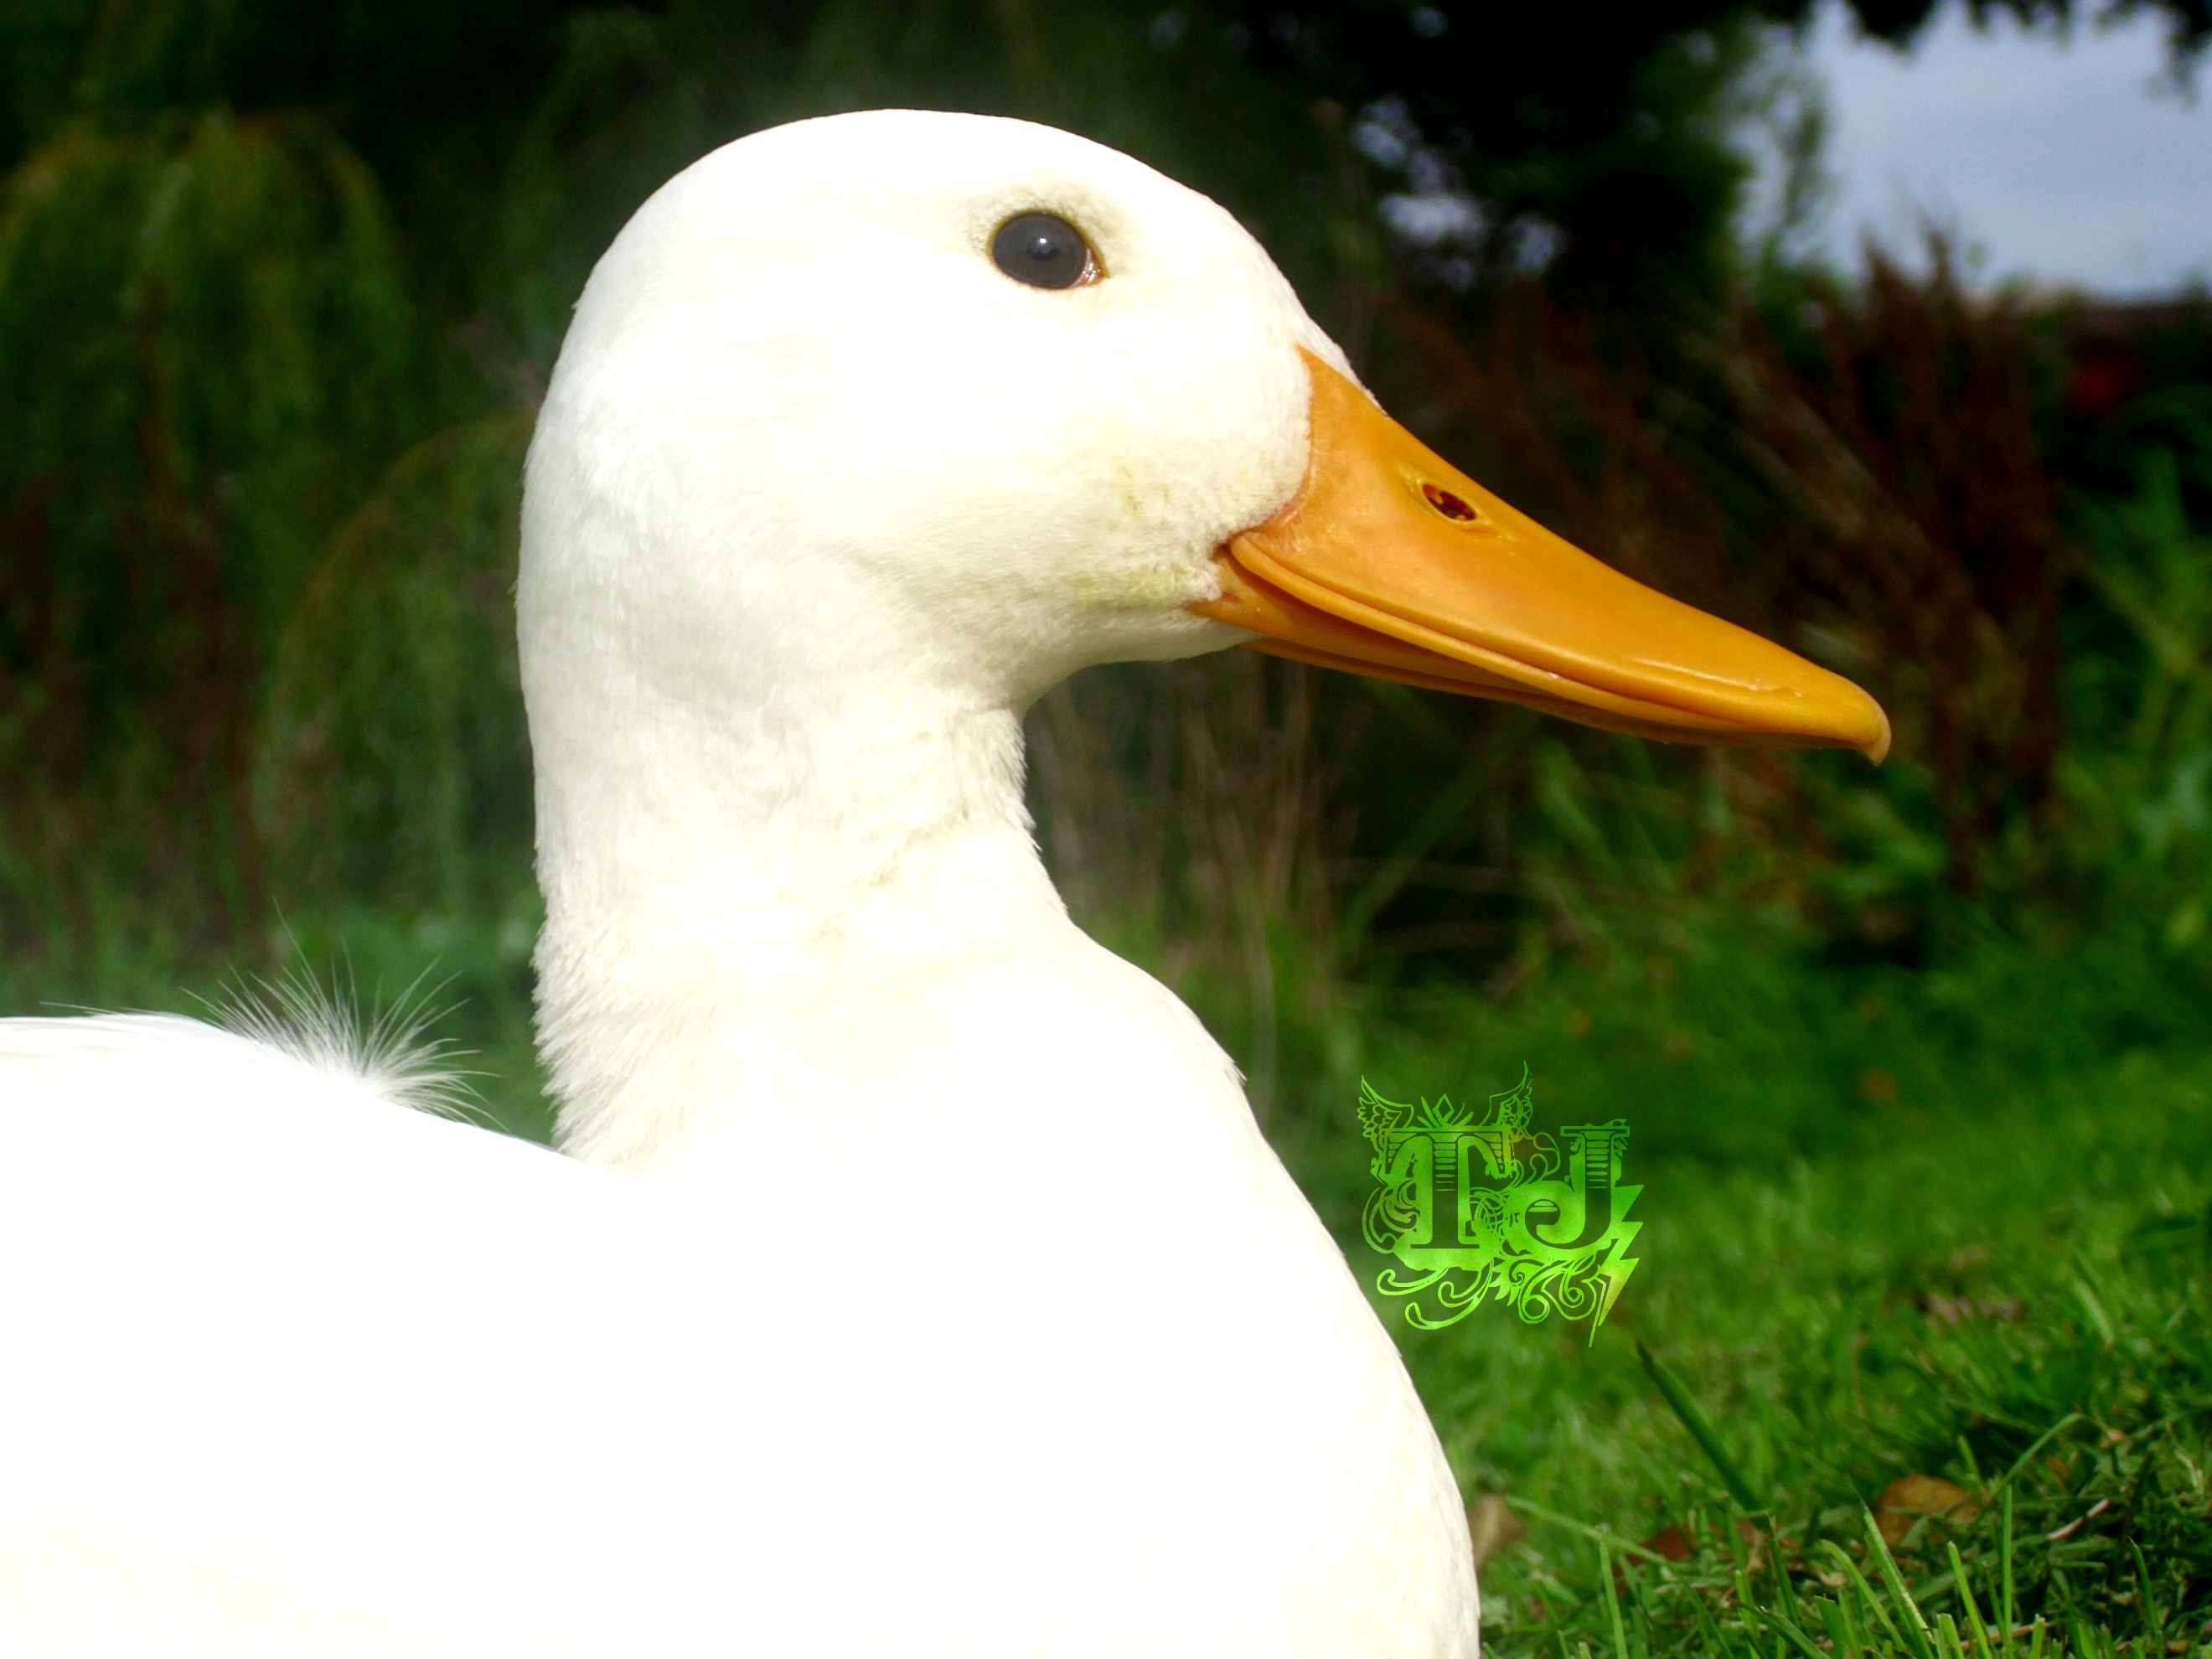 White duck by db28-photography on DeviantArt